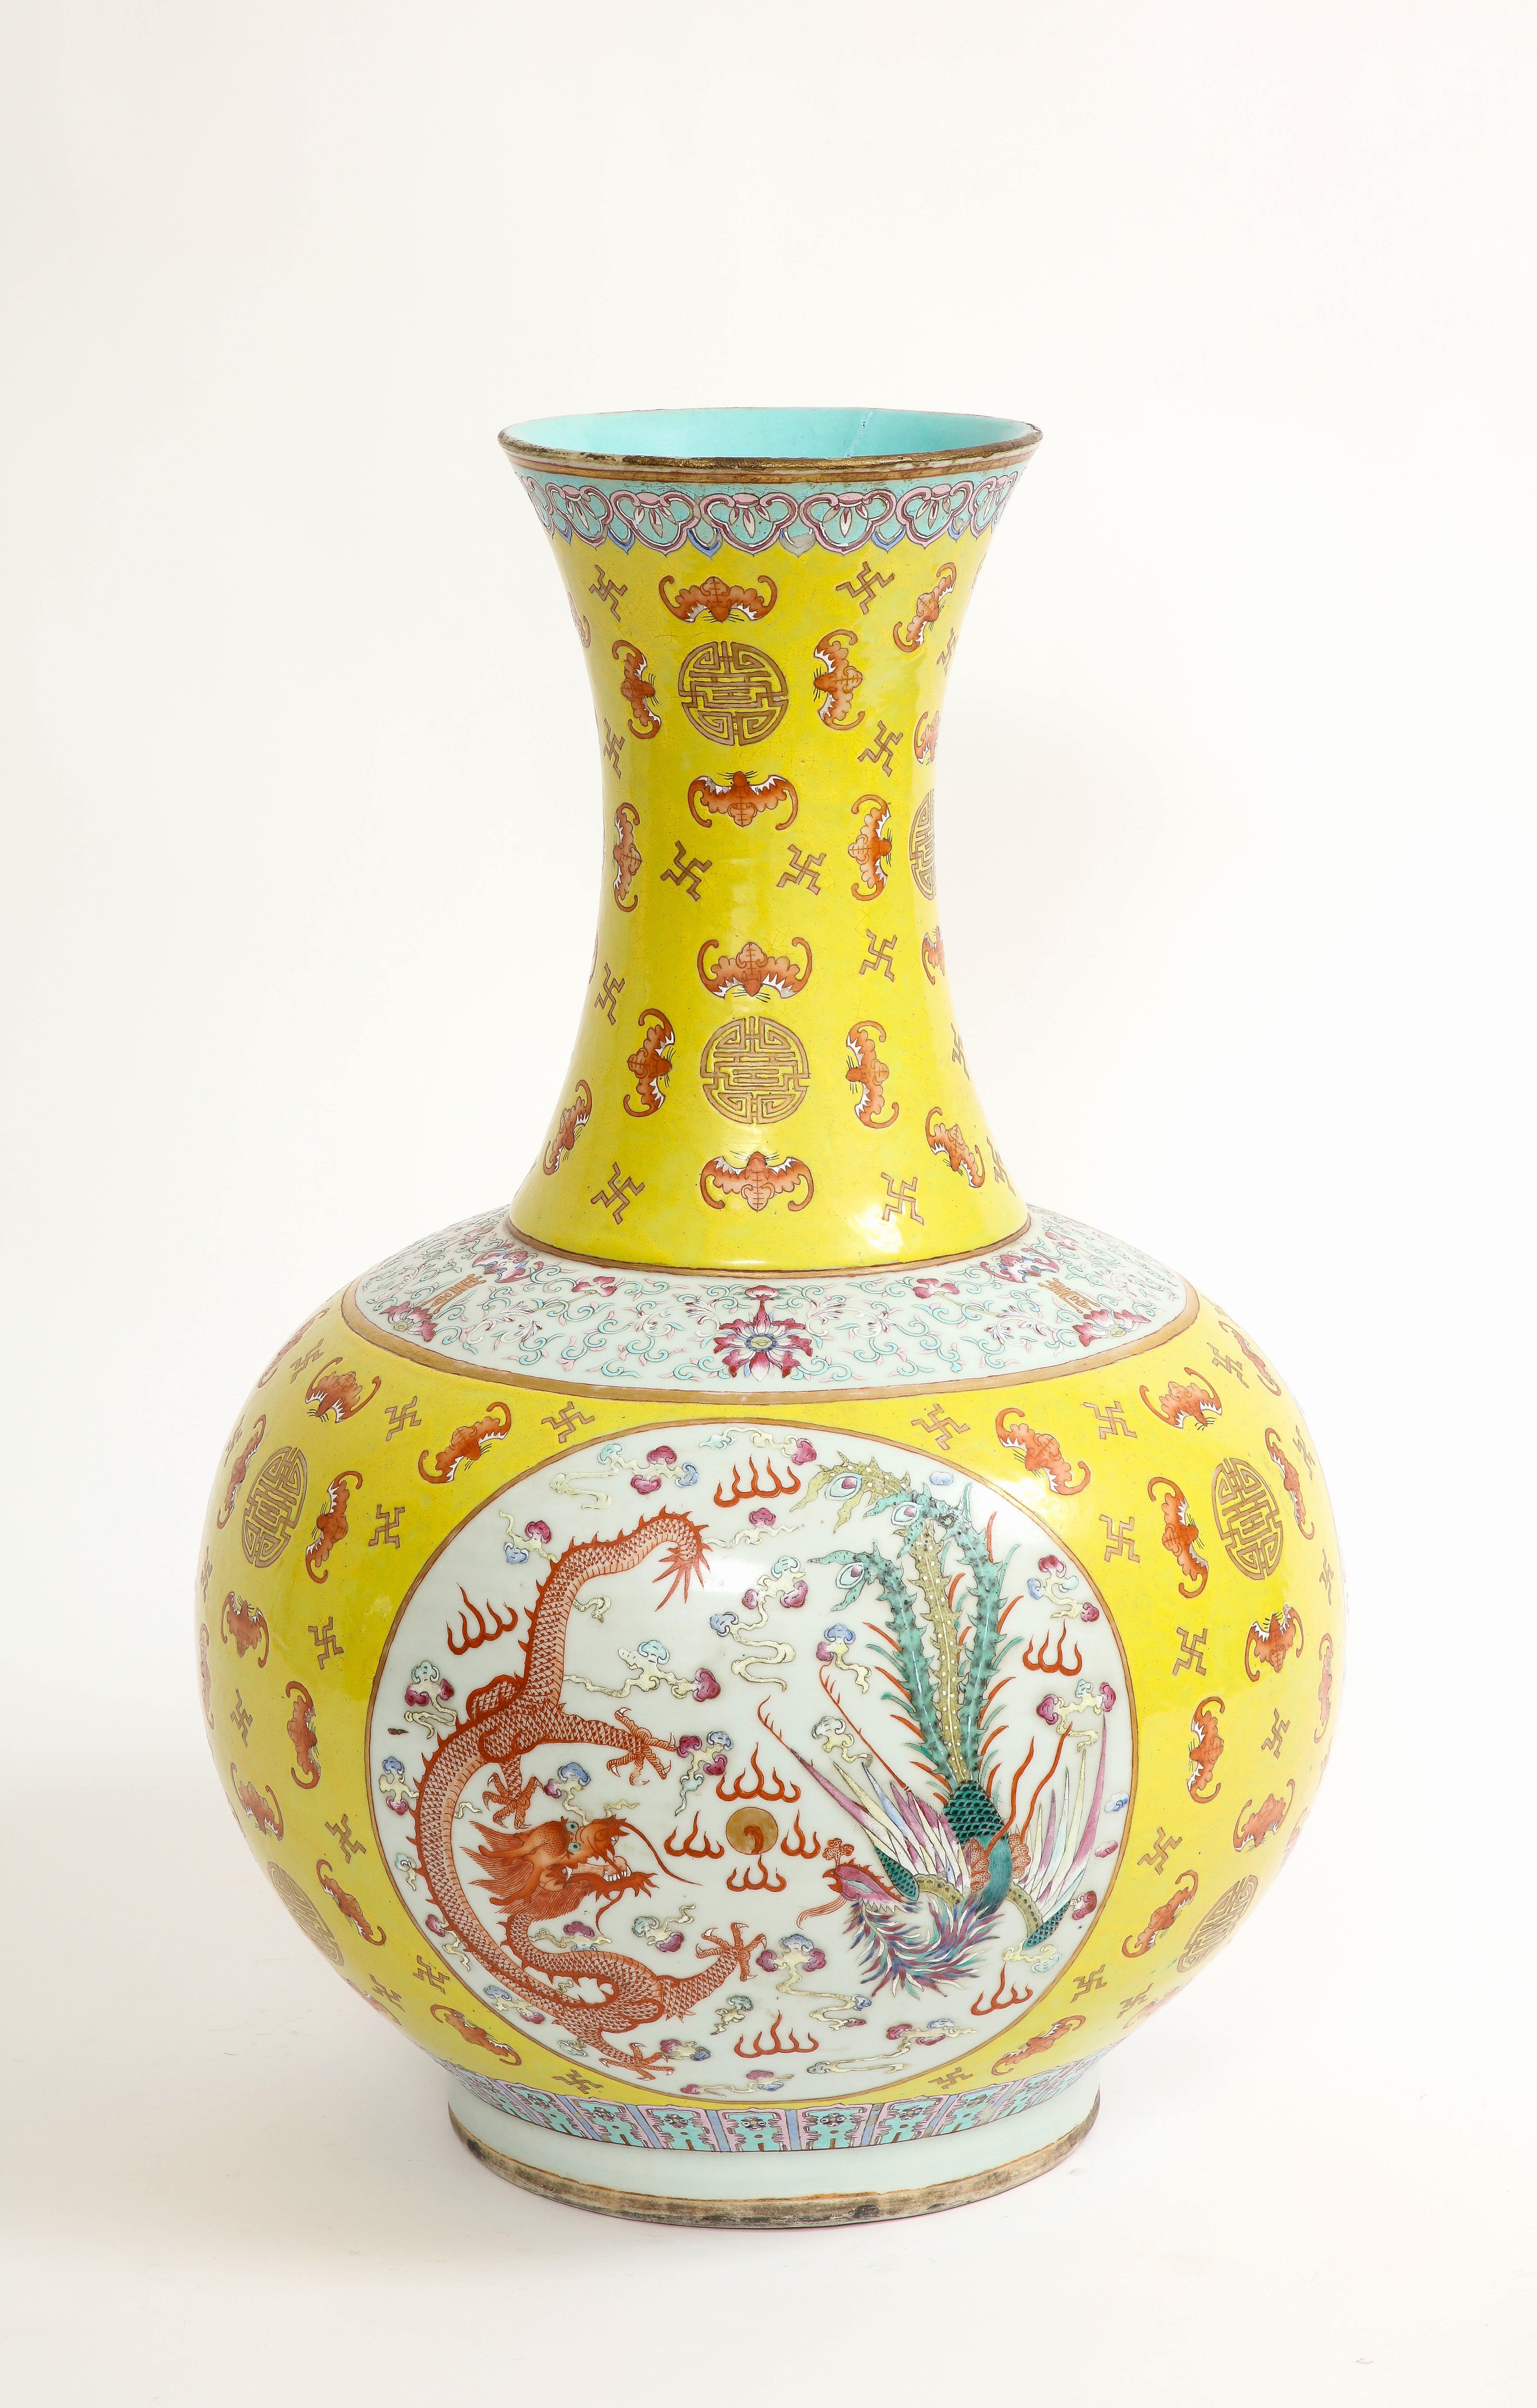 Large Chinese Yellow-Ground Famille-Rose 'Dragon & Phoenix' Vase, Guangxu, 1800s

Presenting an exquisite masterpiece from the 19th century, hailing from China's illustrious Guangxu Period, is an awe-inspiring yellow-ground famille-rose vase.